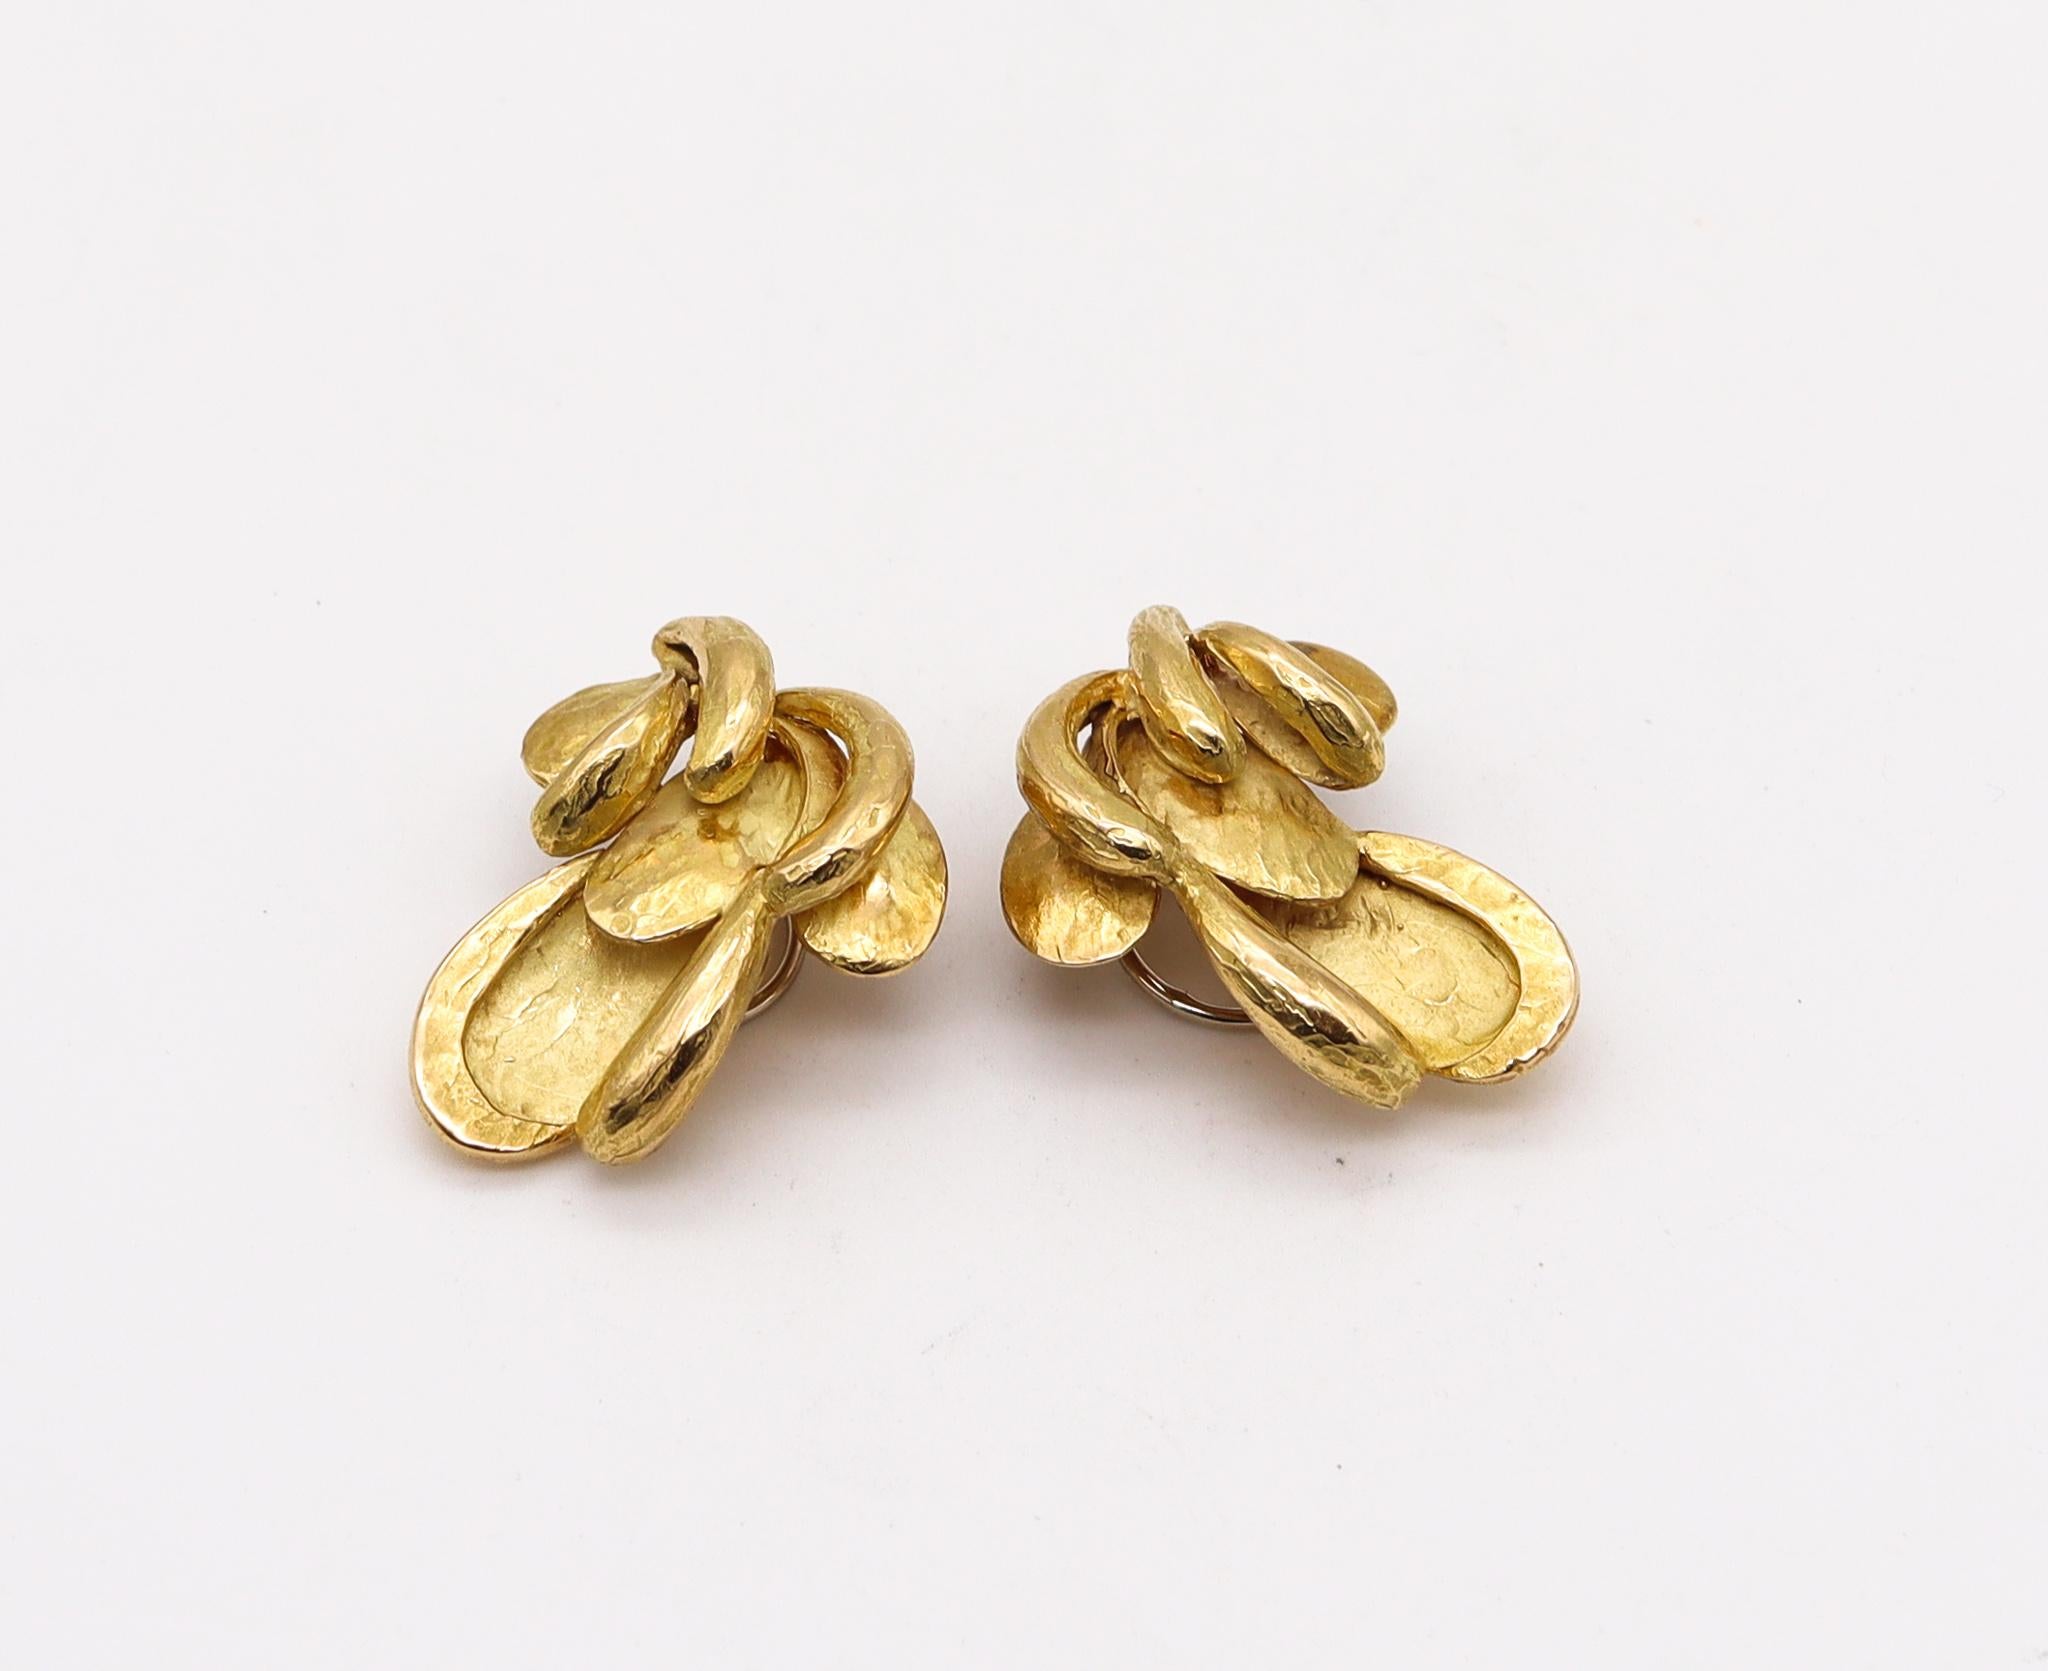 Organic clips on earrings designed by Chaumet.

A vintage pair of earrings, made in Paris France by the jewelry house of Chaumet, back in the 1970's. This earrings has been crafted as a left and right pairs, with organic stylized patterns in solid